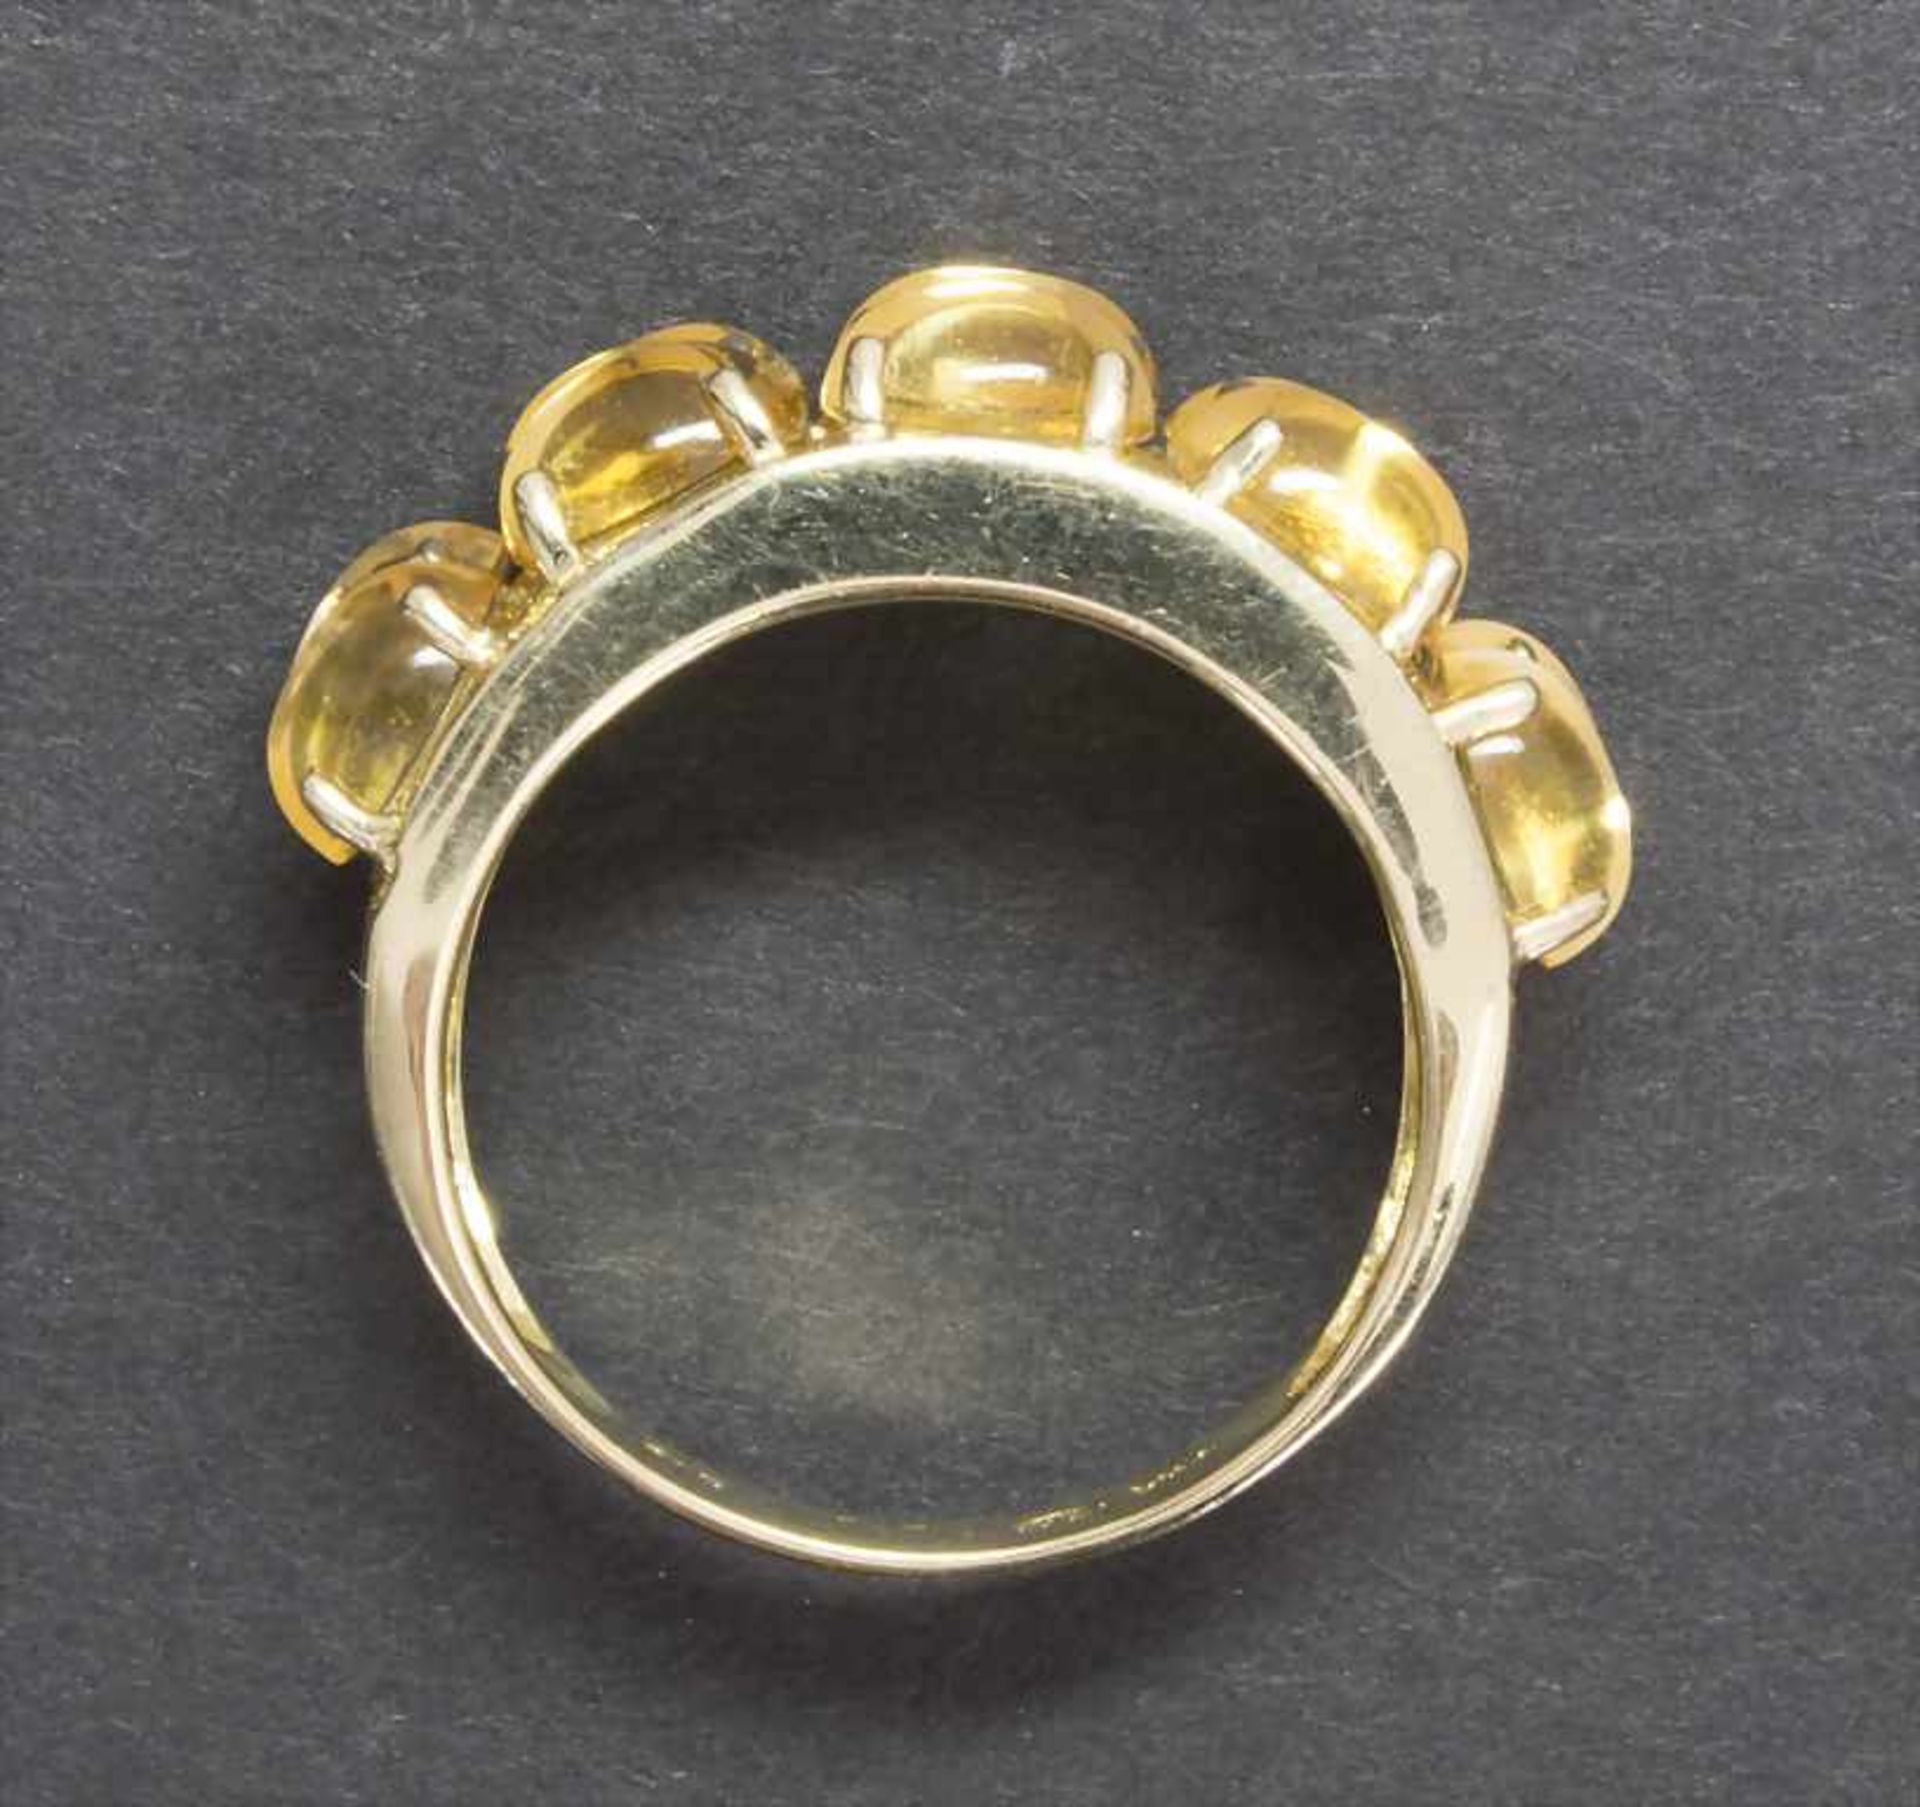 Damenring mit Citrin / A ladies ring with citrine - Image 2 of 3